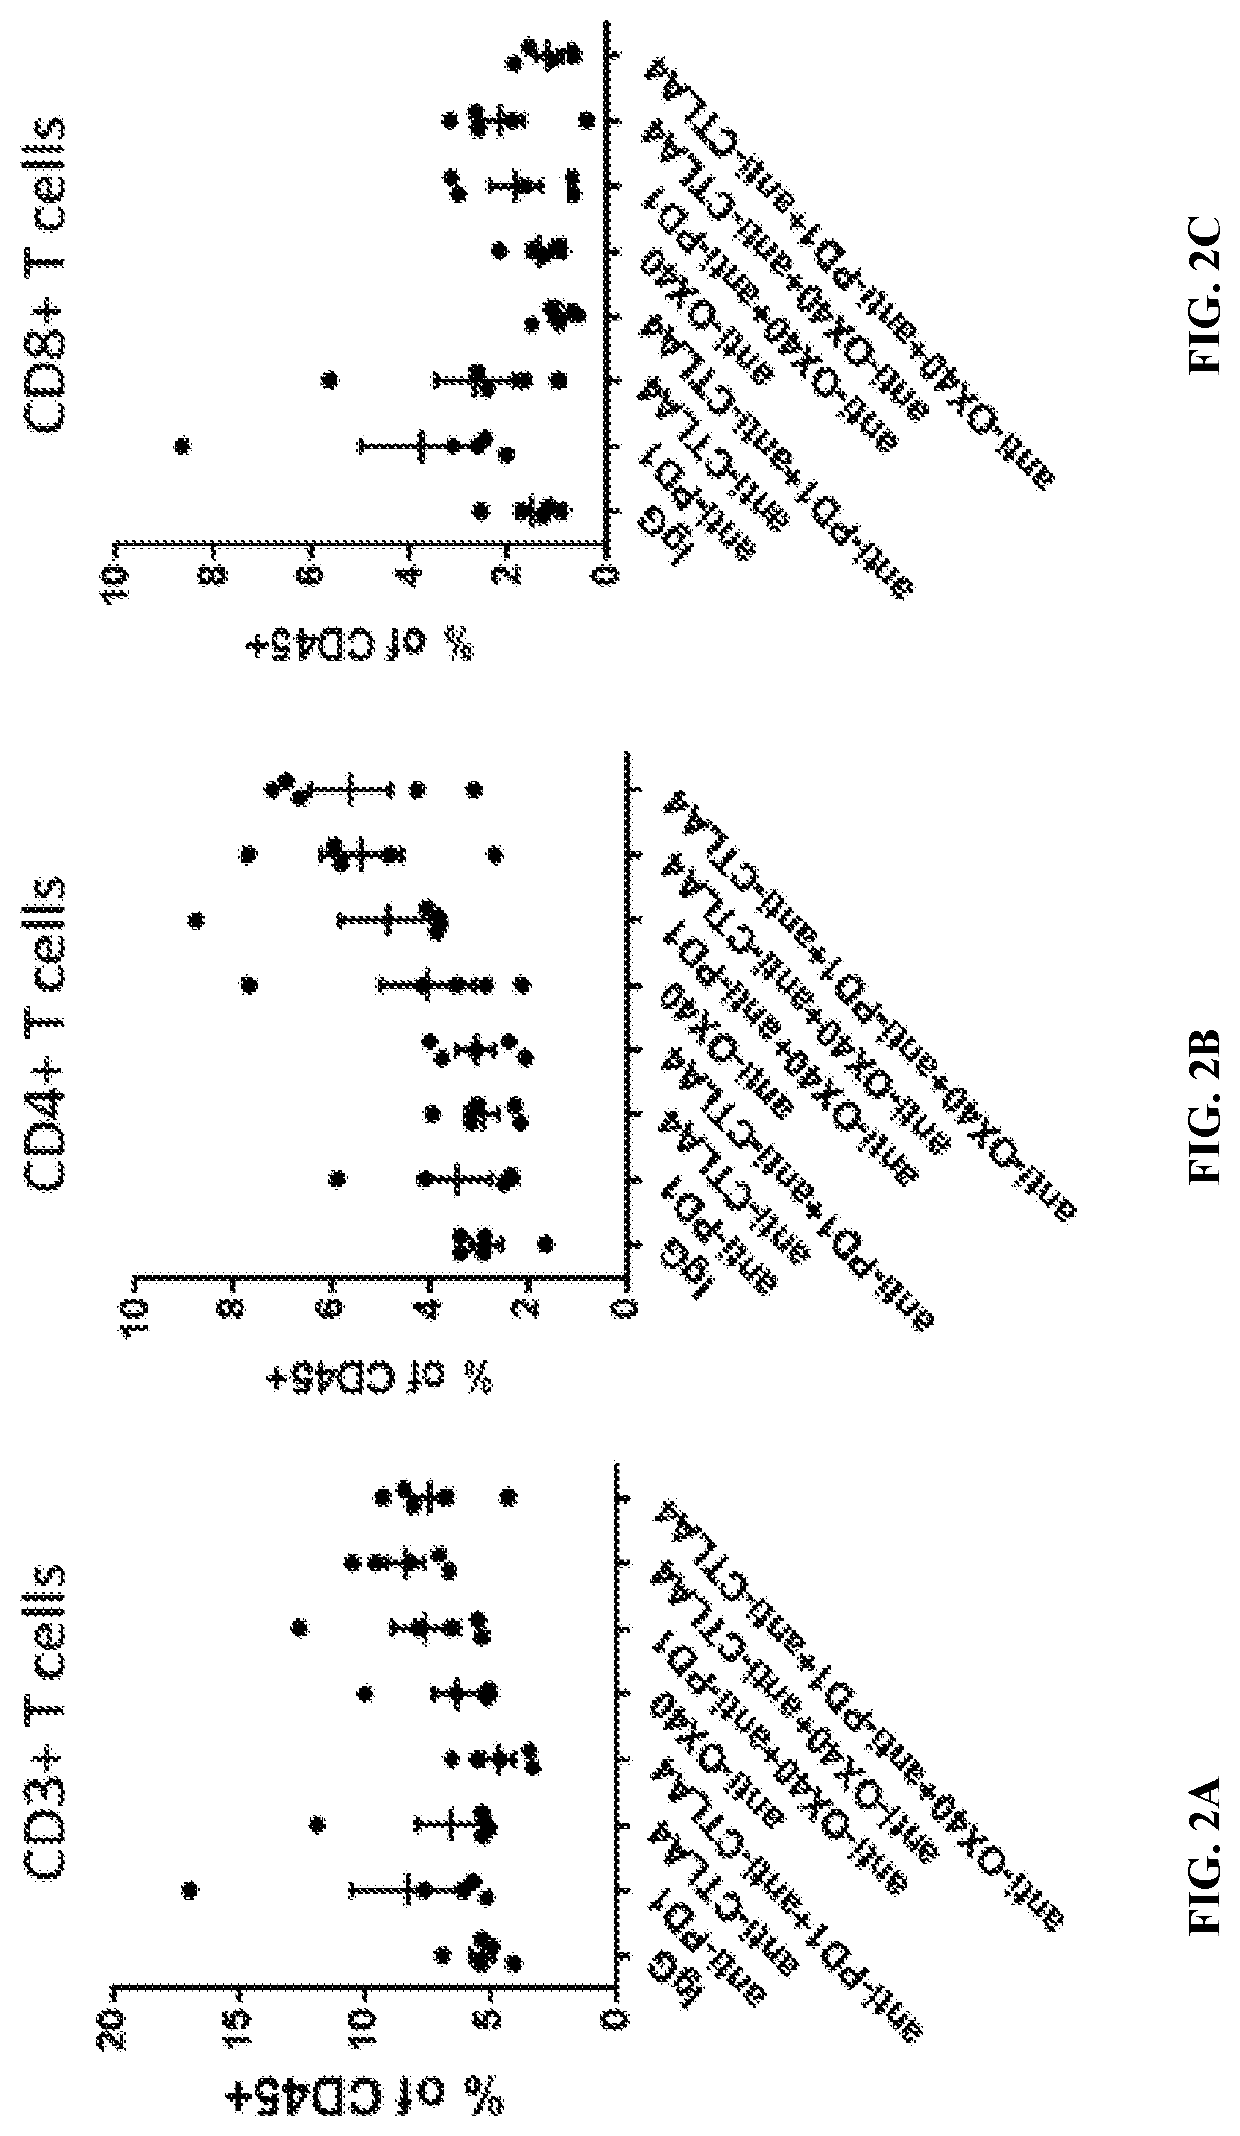 Ox-40 agonist, pd-1 pathway inhibitor and ctla-4 inhibitor combination for use in a method of treating a cancer  or a solid tumor